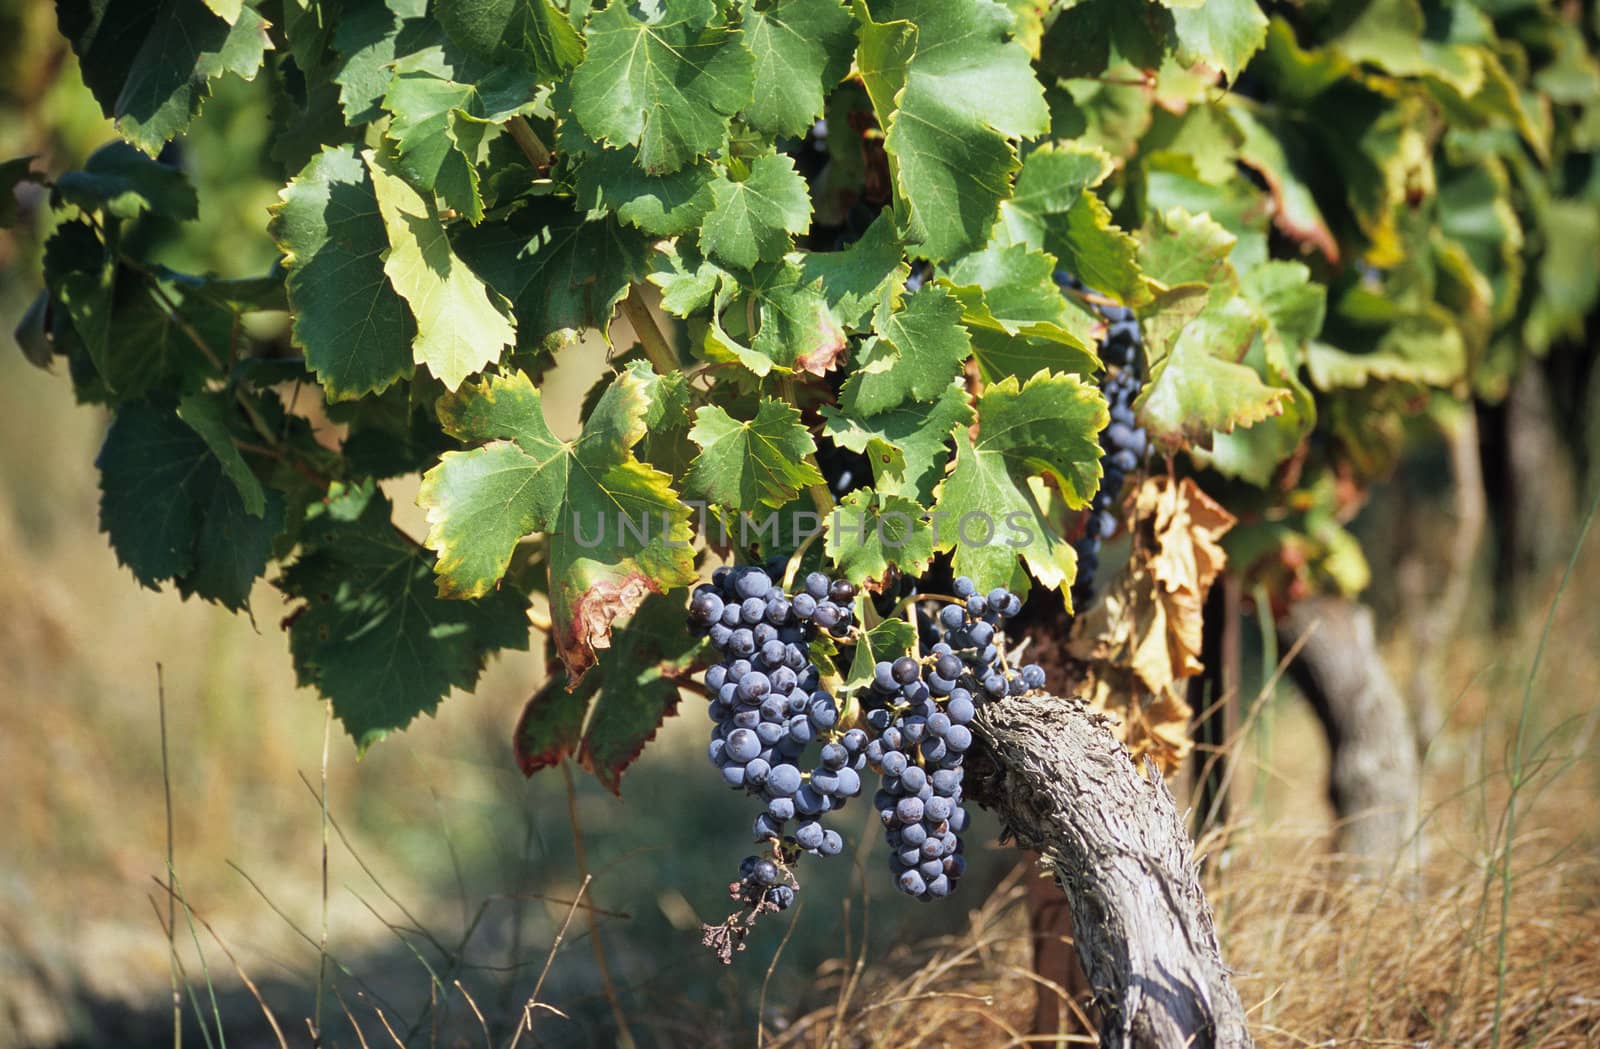 Grapes growing in the Provence region of France for the wine harvest.